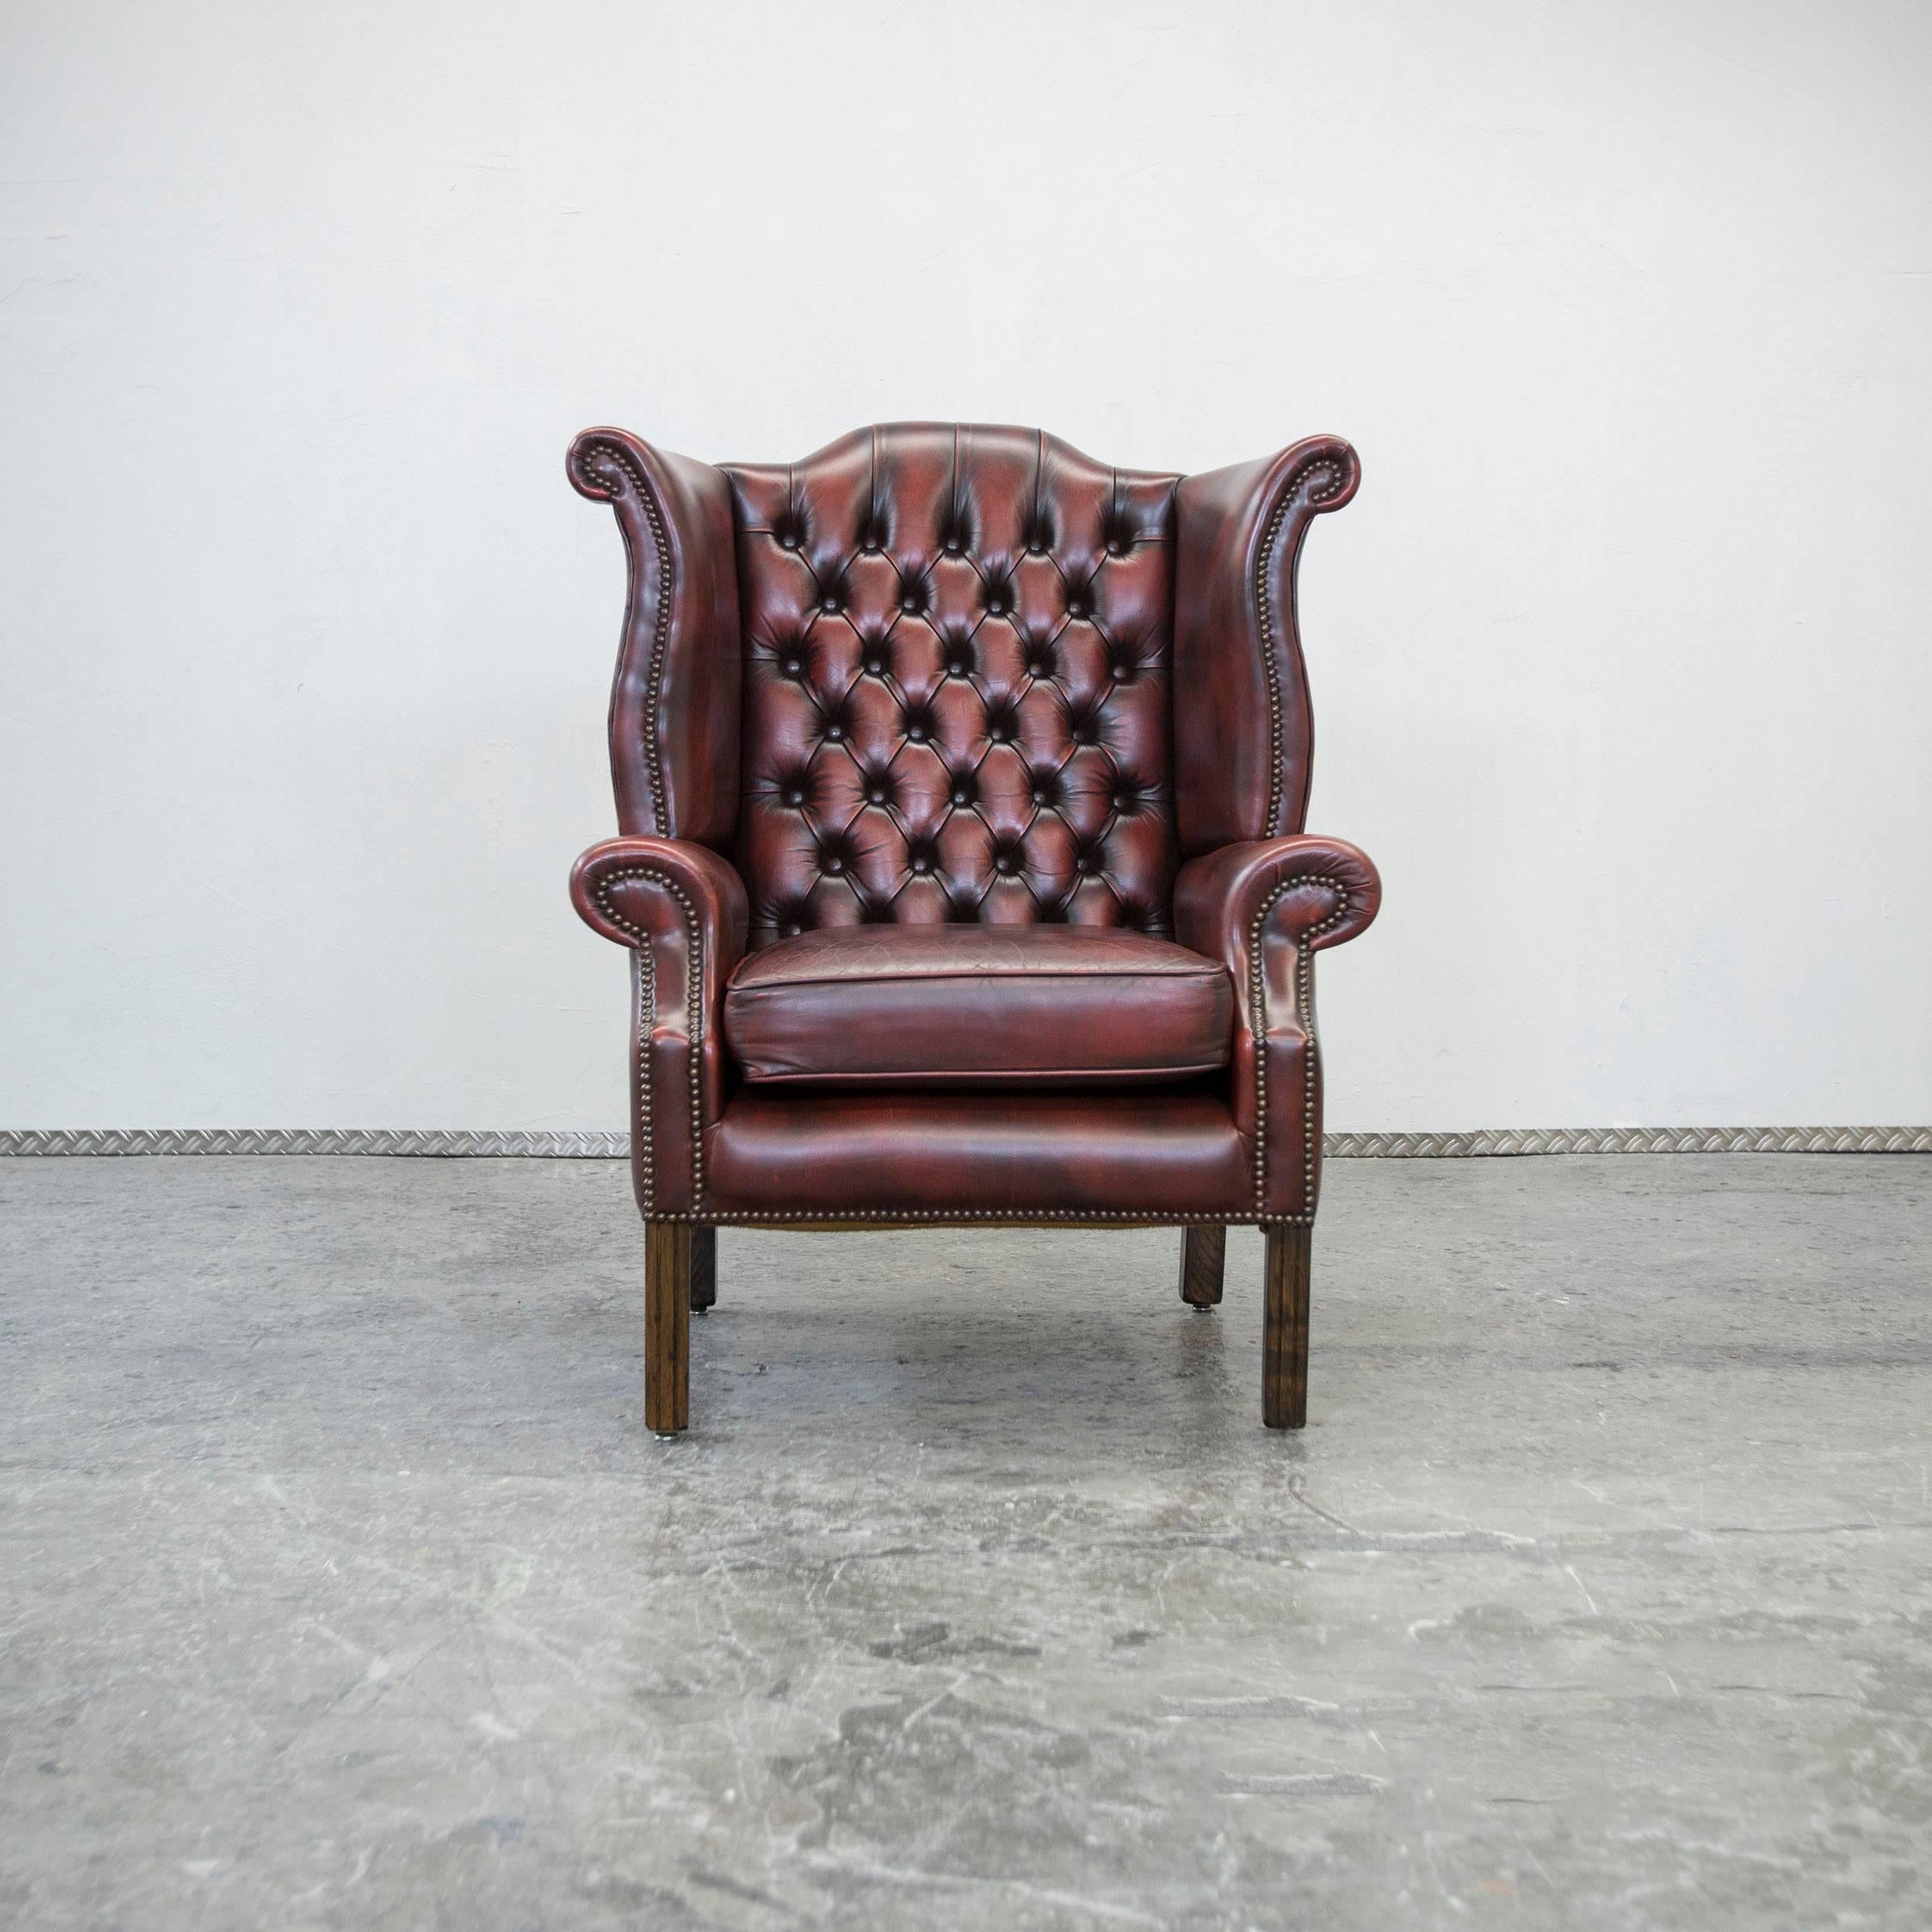 Oxblood red colored Chesterfield leather wingchair in a vintage design, made for pure elegance and comfort.